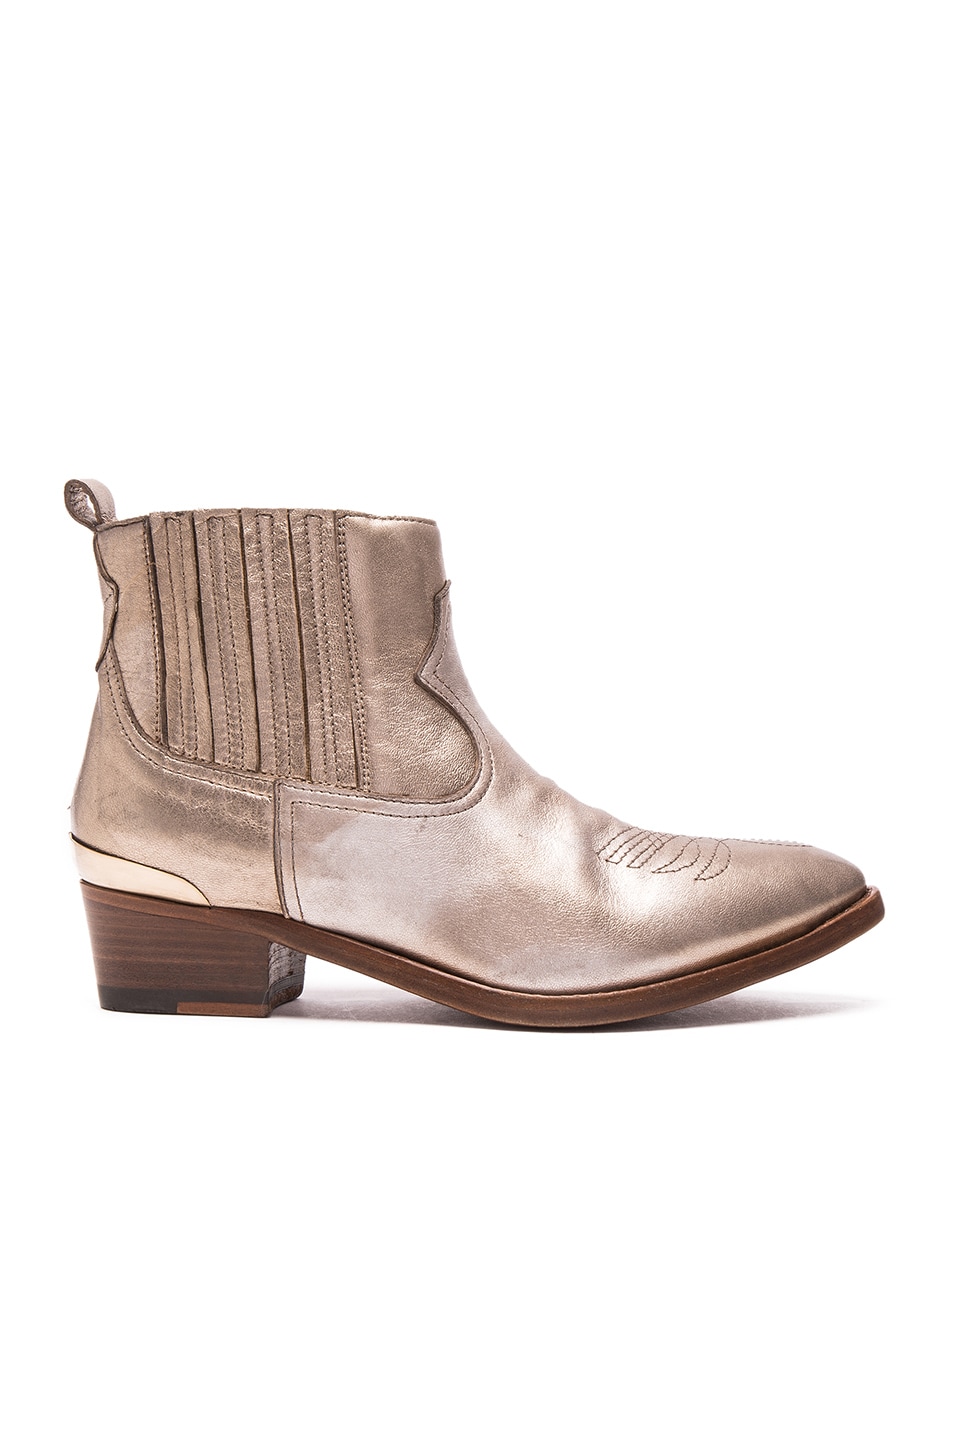 Image 1 of Golden Goose Daisy Boots in Platinum